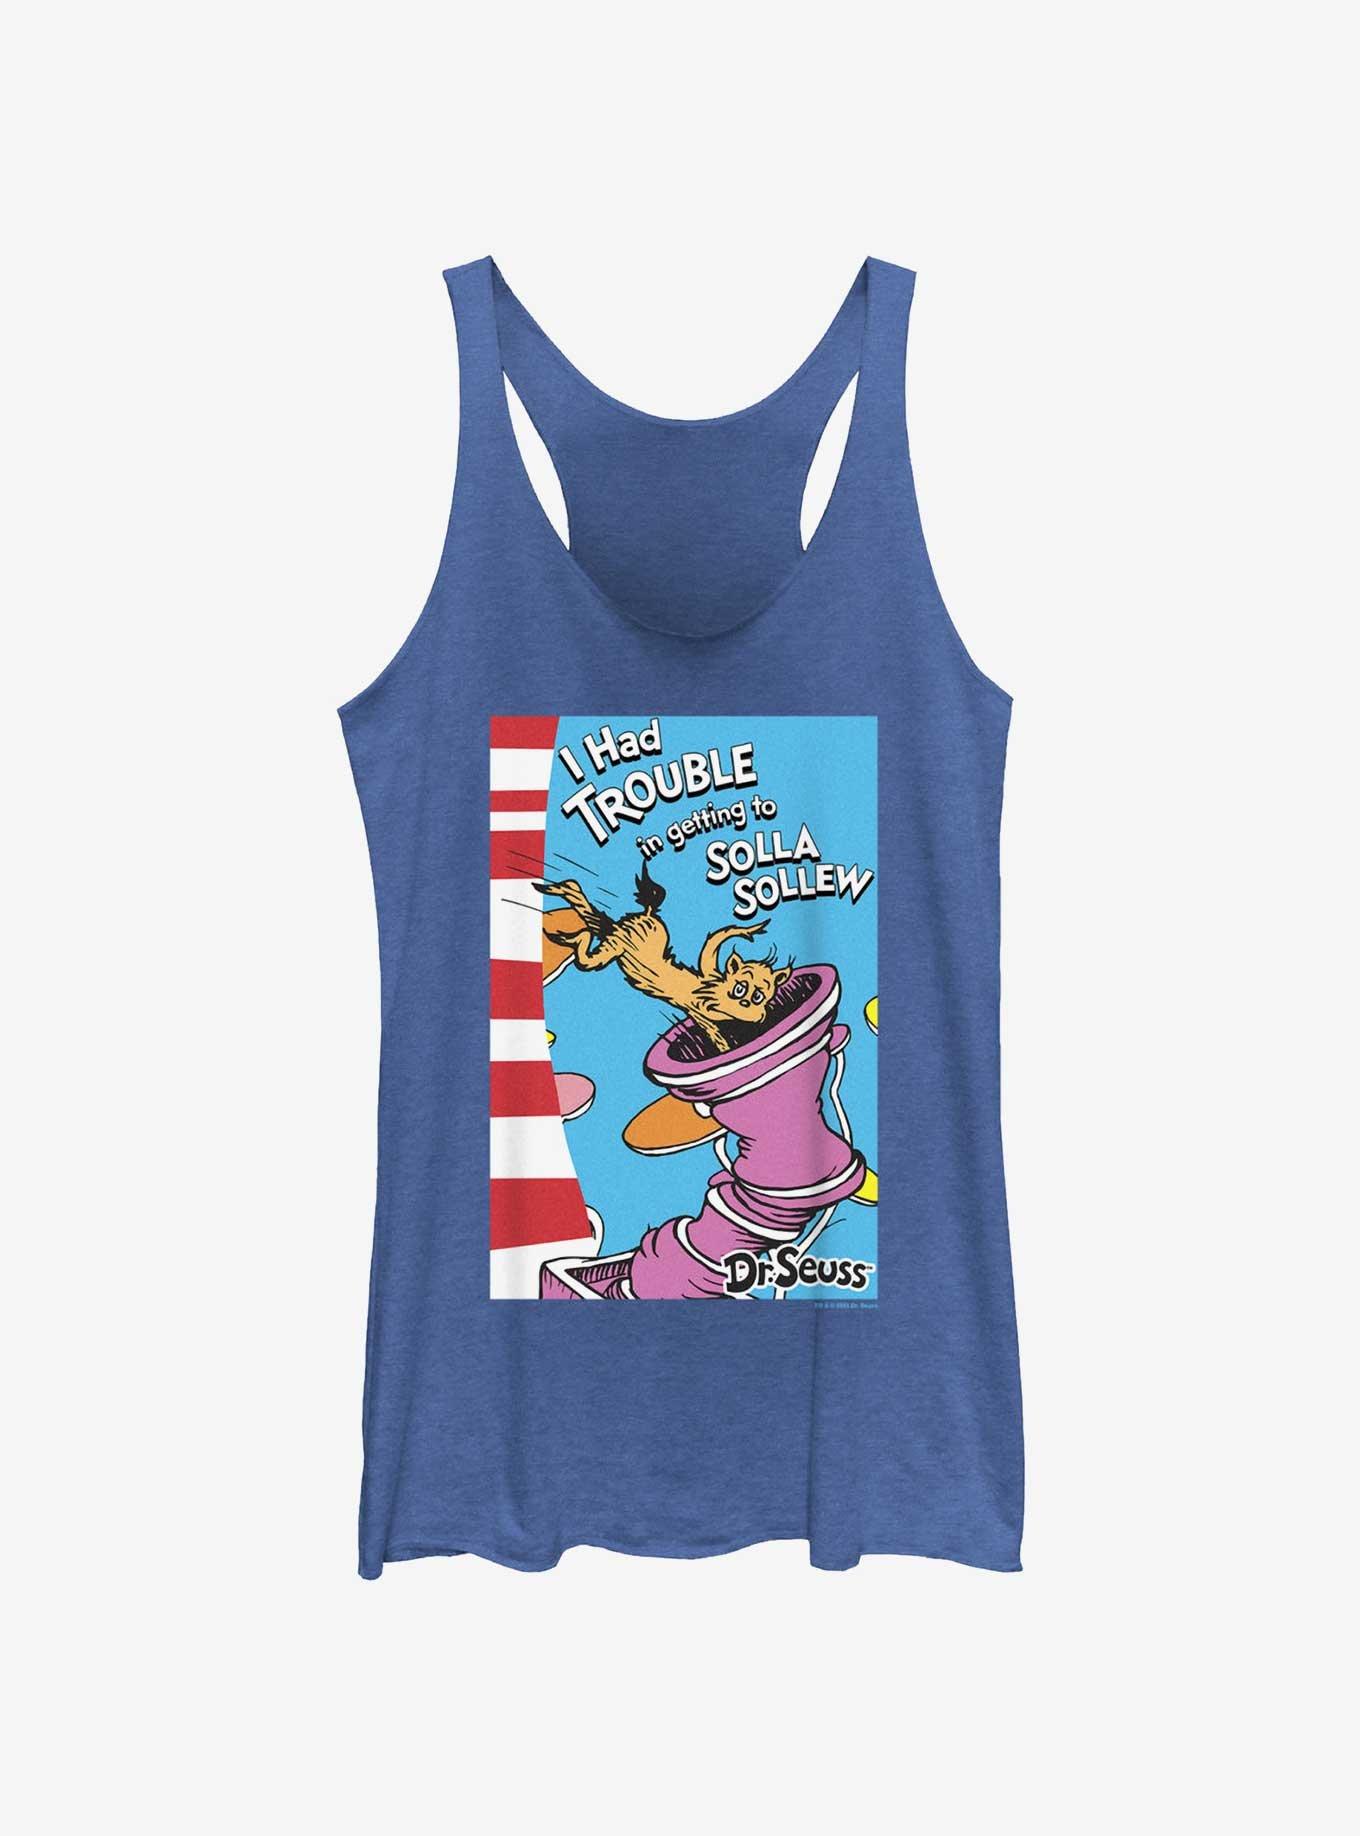 Dr. Seuss's I Had Trouble Getting Into Solla Sollew Cover Womens Tank Top, ROY HTR, hi-res